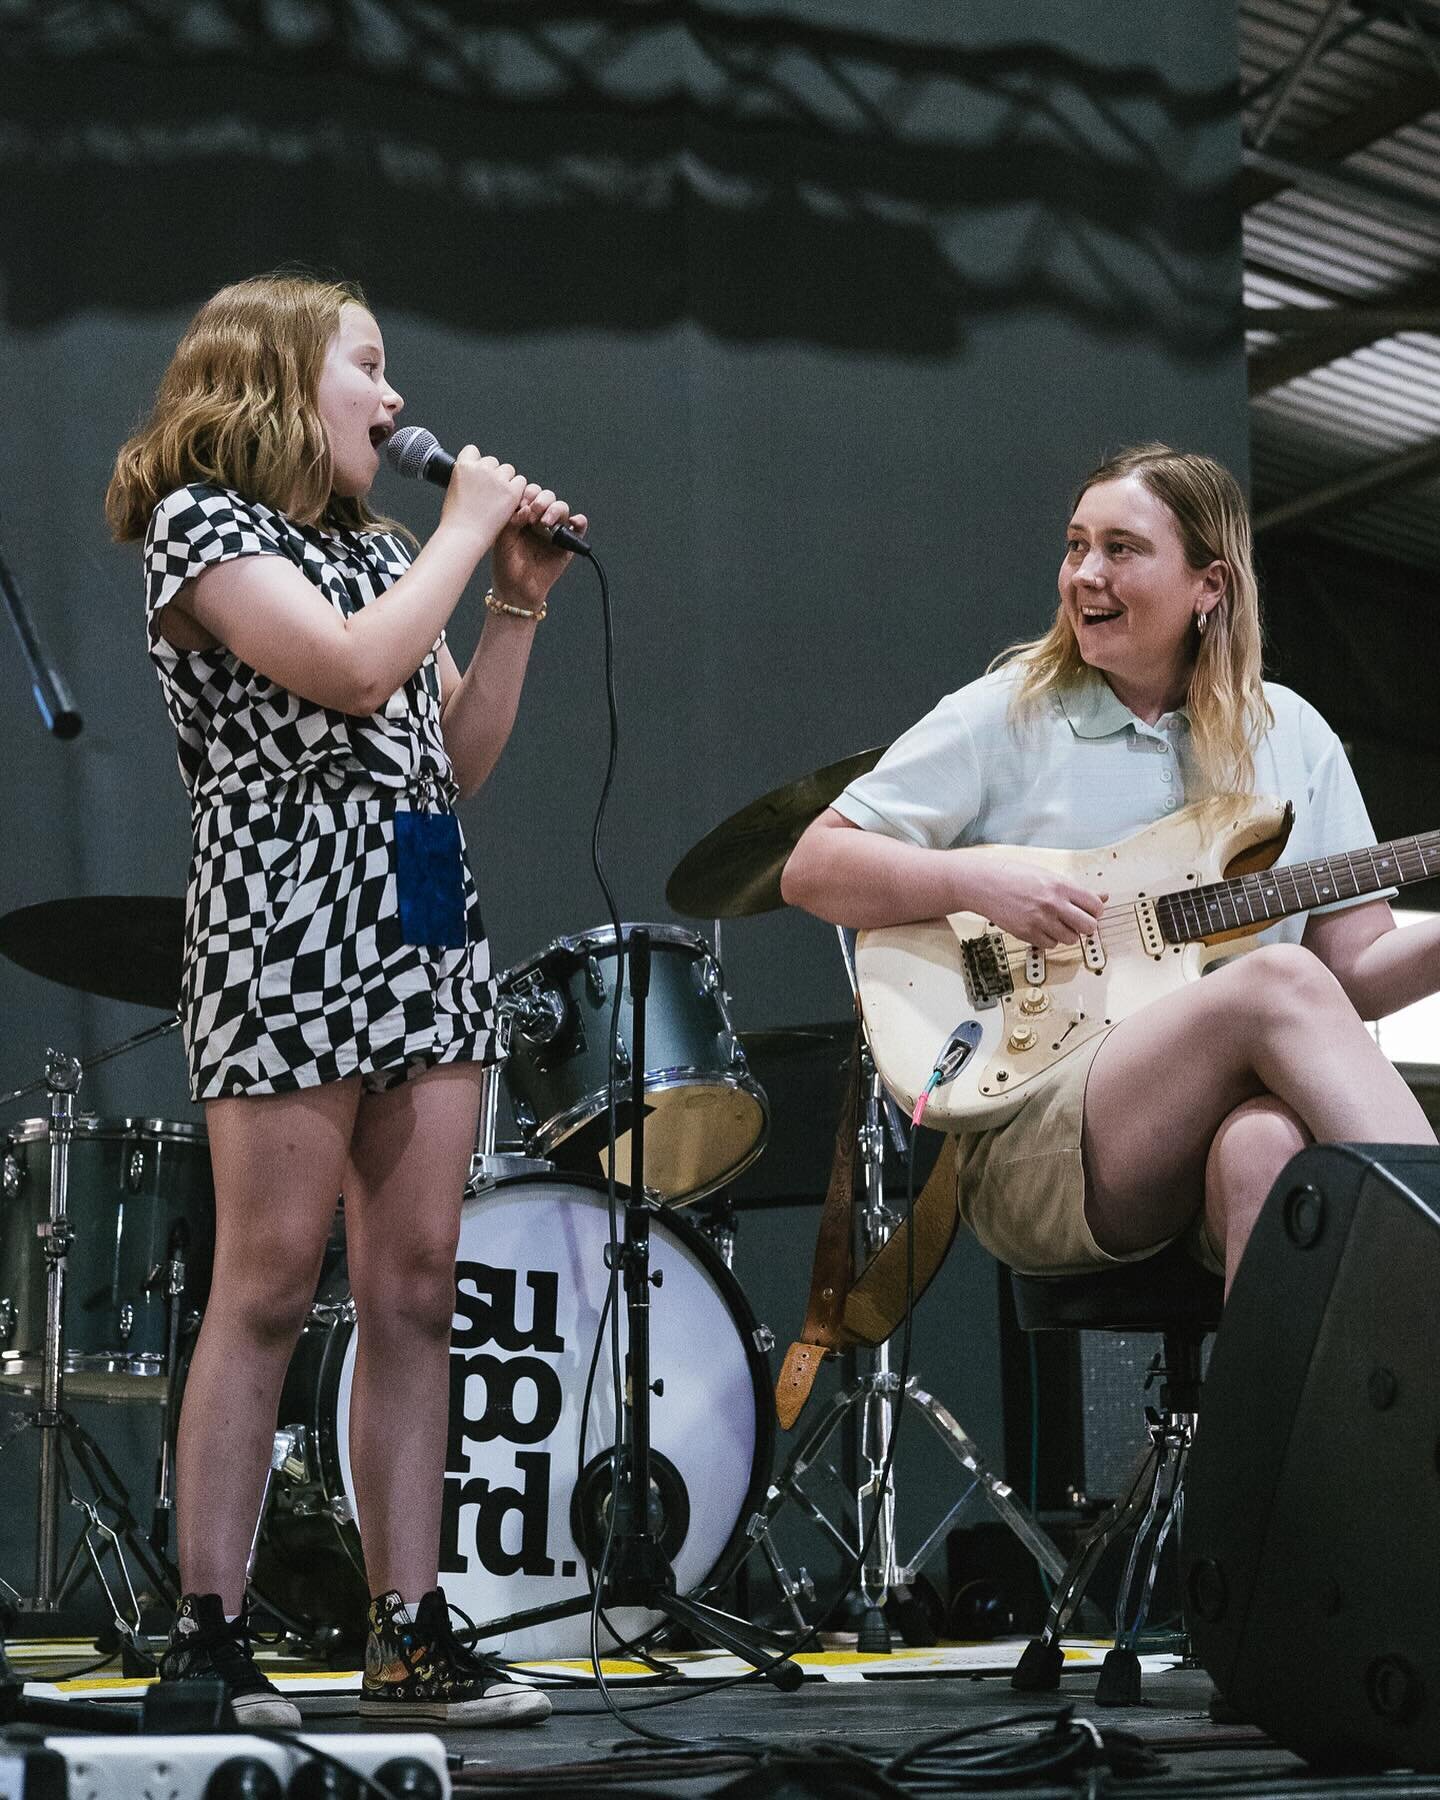 🐉 MAUDE AND THE MYSTERIOUS MONSTERS 🐉

This young singer songwriter has been writing her own songs with her incredible mentor @ashajefferies for over a year now, and getting to watch them rock one of her originals on stage at Butterfest was a heart